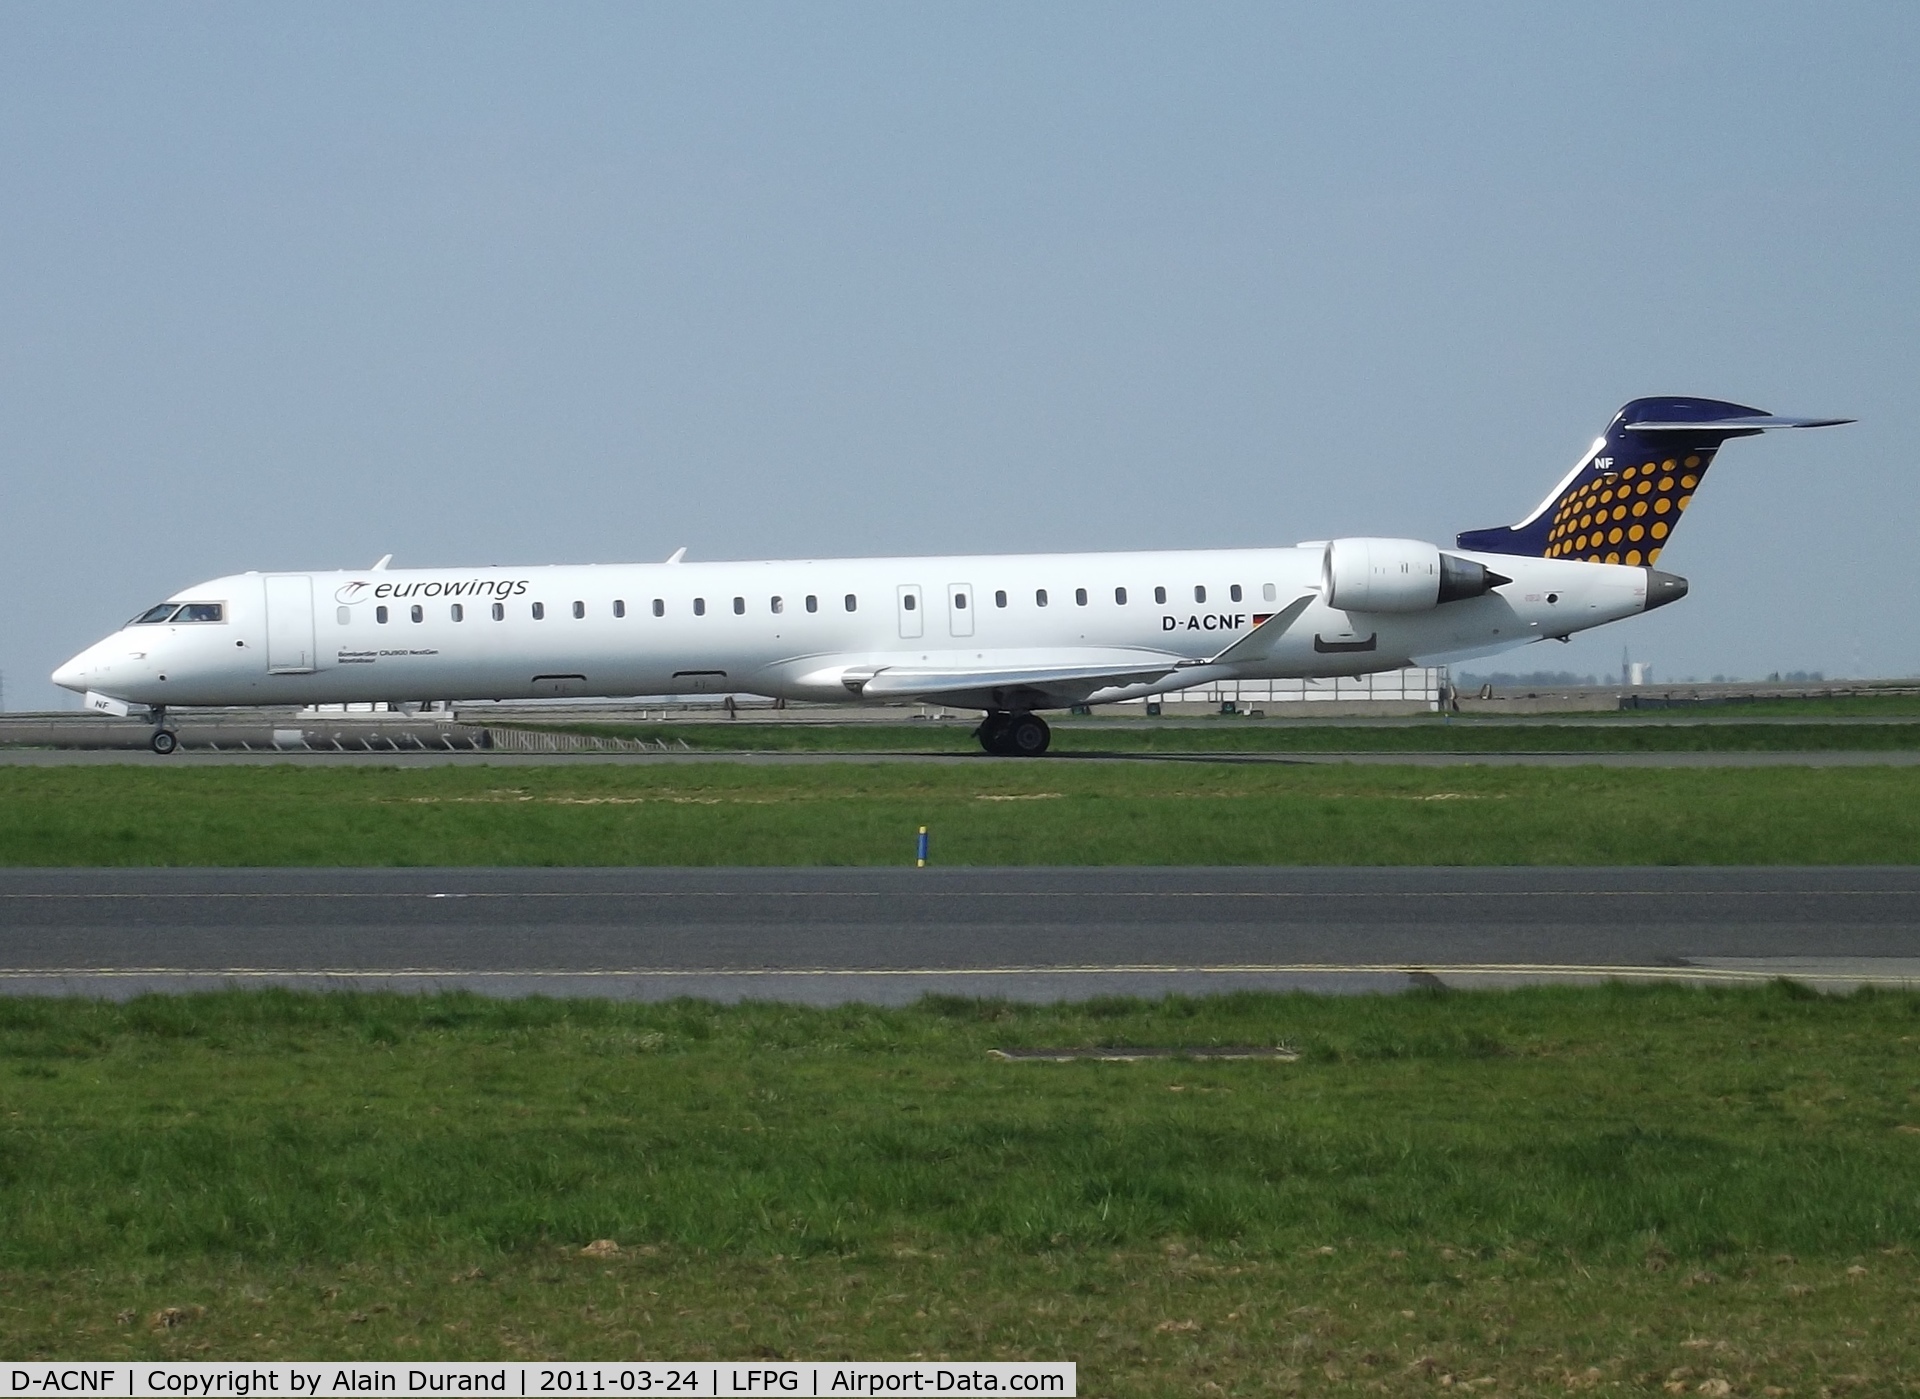 D-ACNF, 2009 Bombardier CRJ-900 (CL-600-2D24) C/N 15243, Named Montabor, November-Foxtrott is one of 23 CRJ-900 opertaed by Eurowings